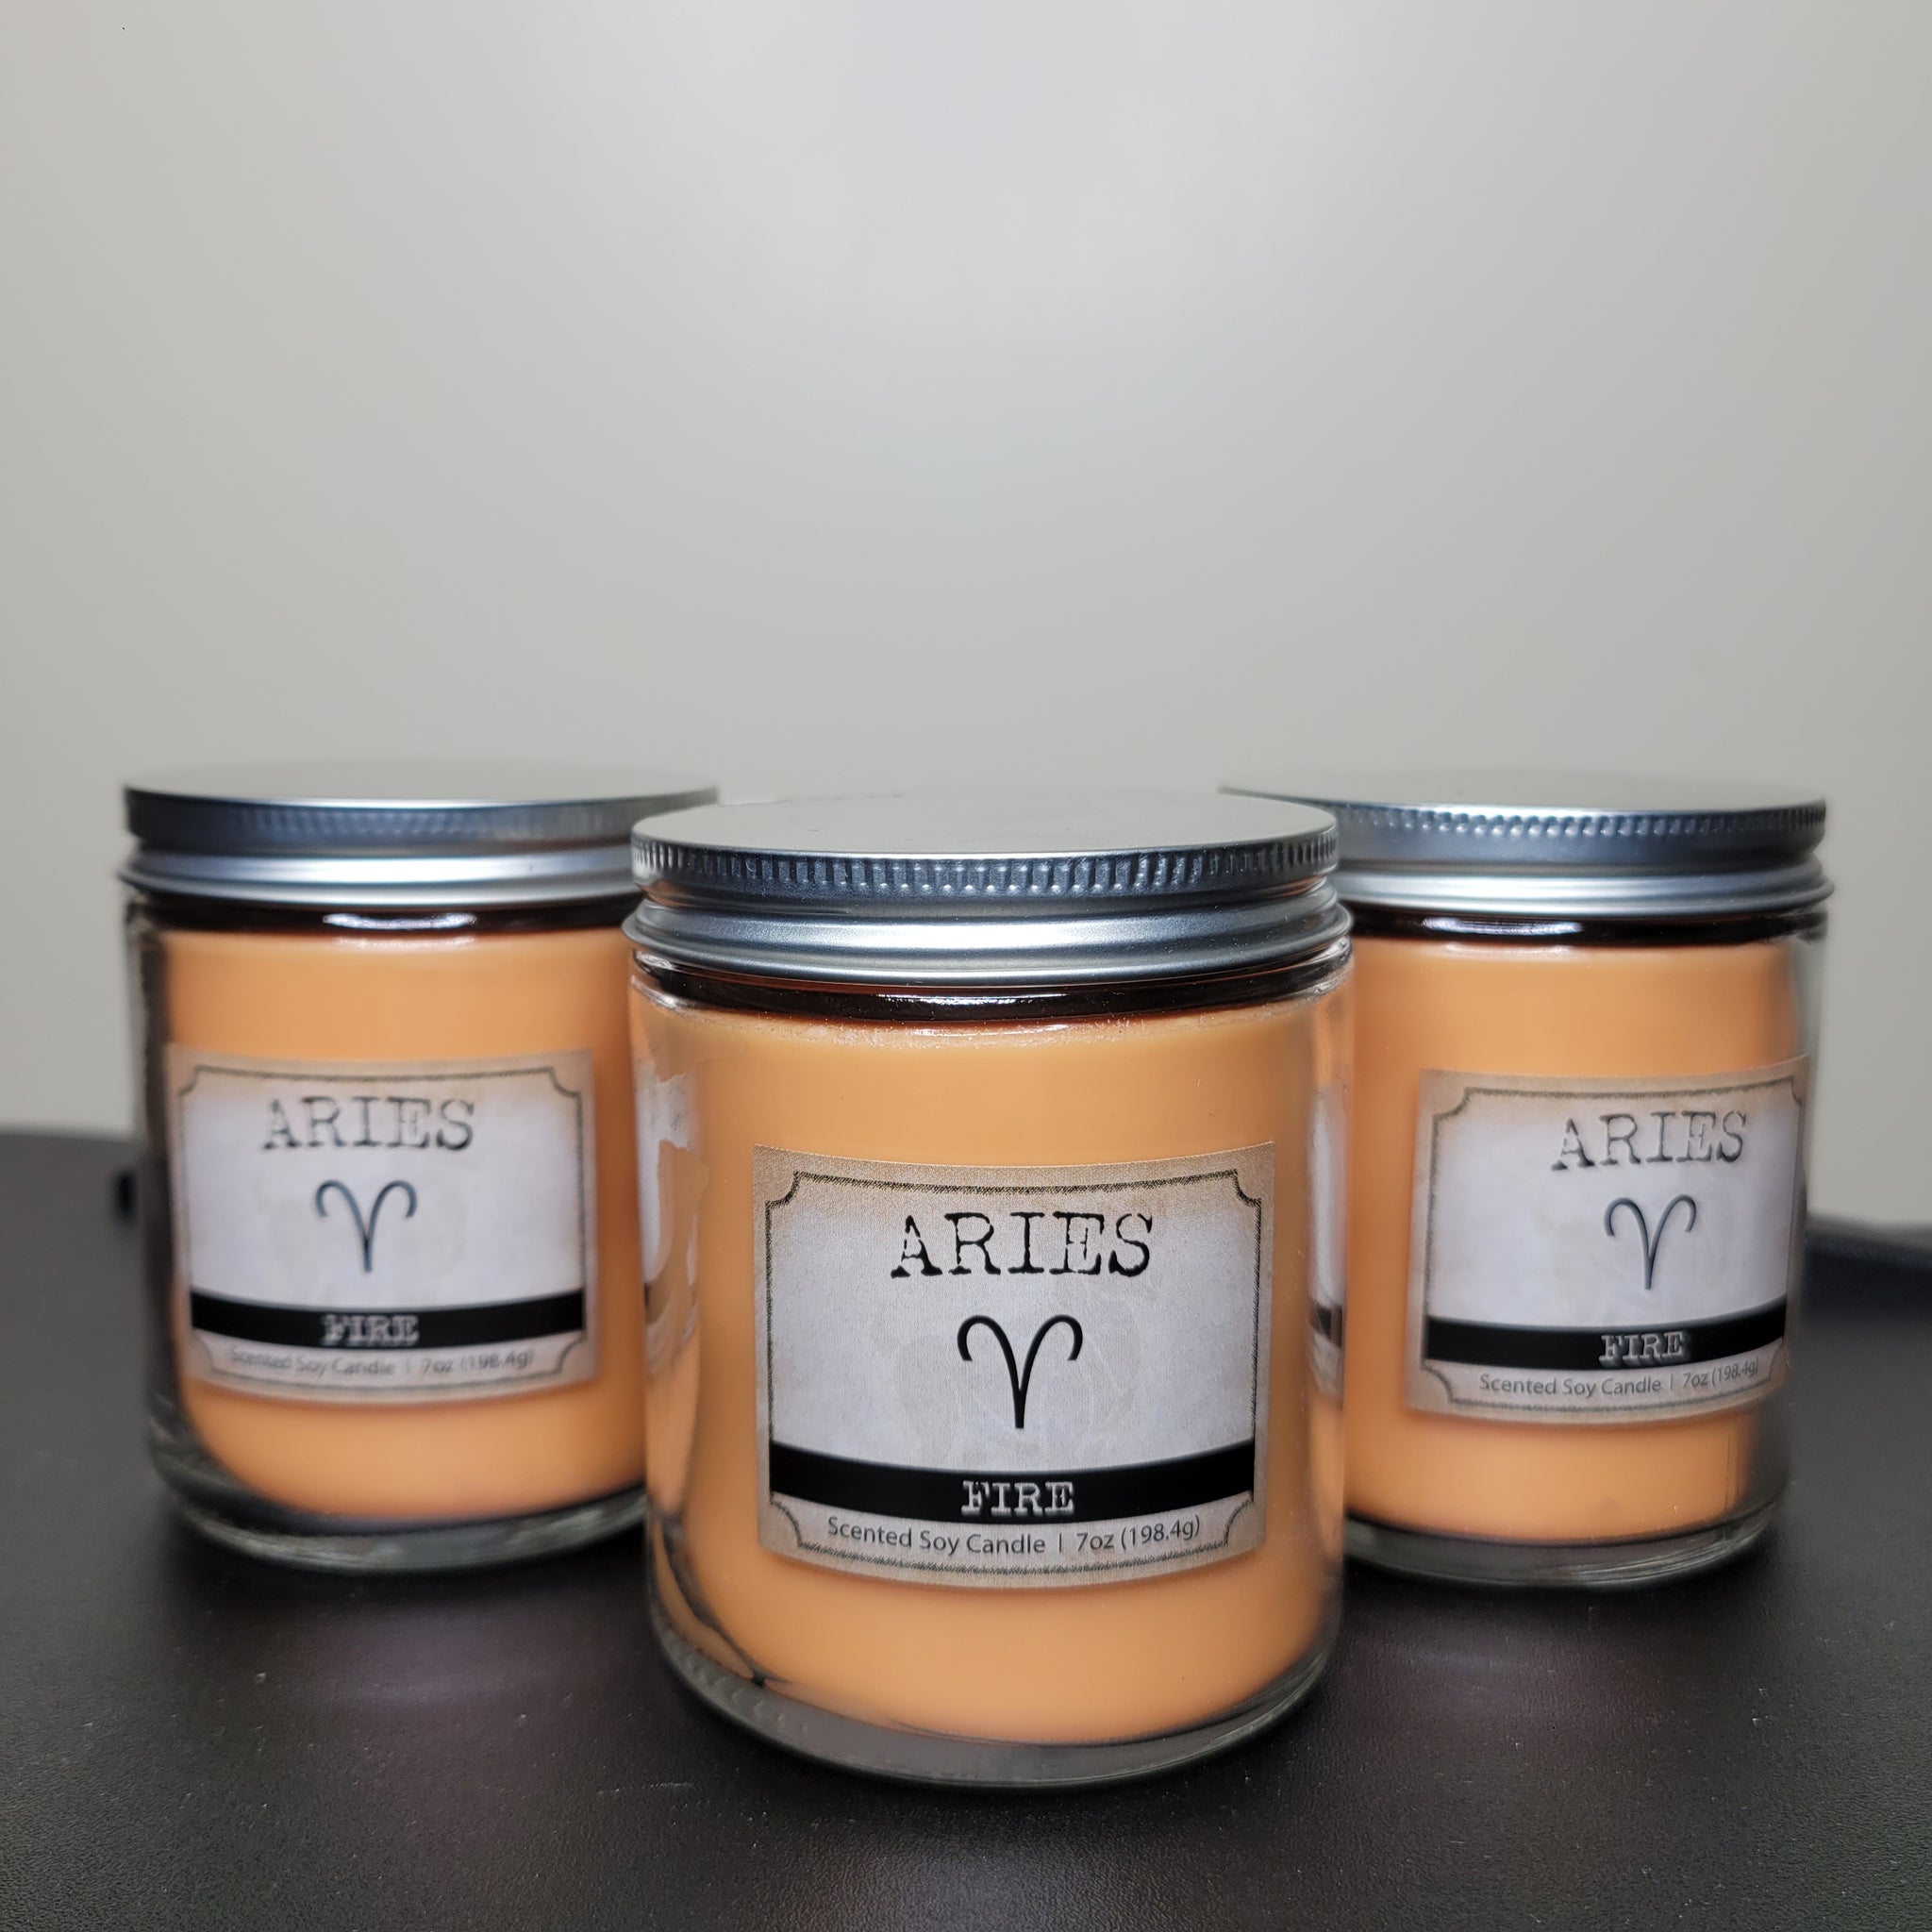 Zodiac Aries Fire Cashmere Amber 7 oz Set of 3 Scented Soy Candles Bundle